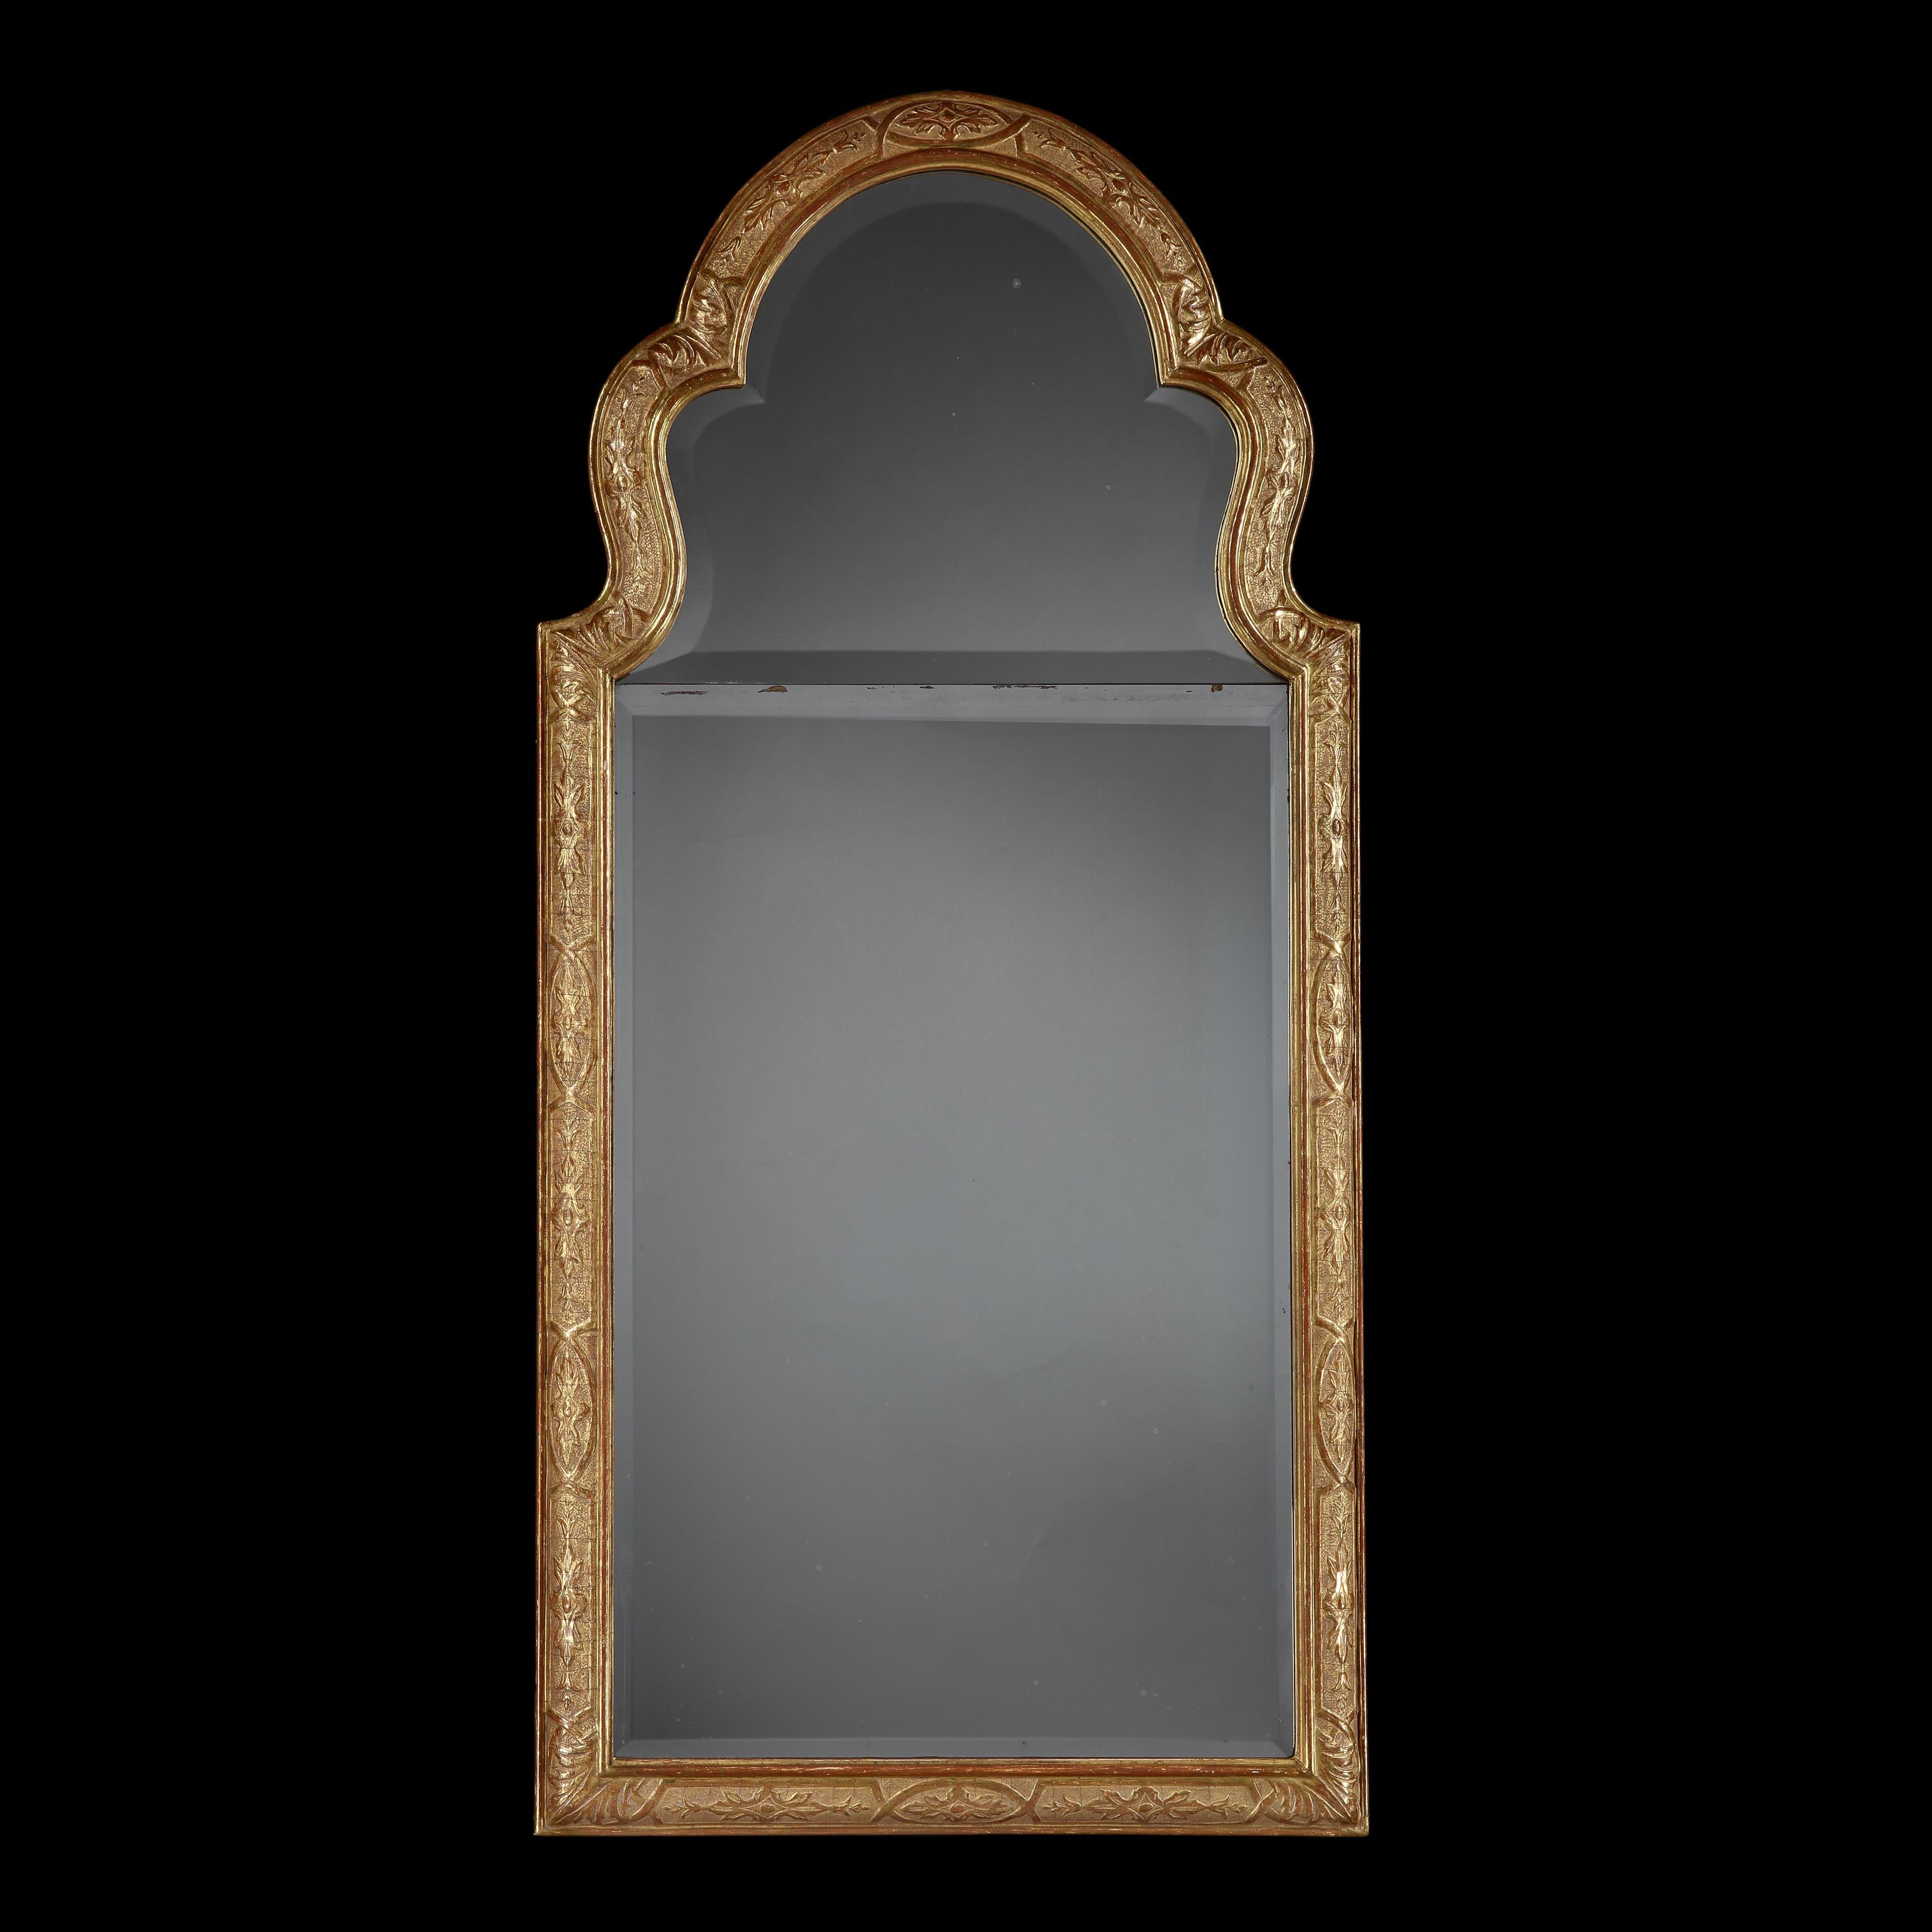 English Fine Pair of Large Queen Anne Style Giltwood Mirrors